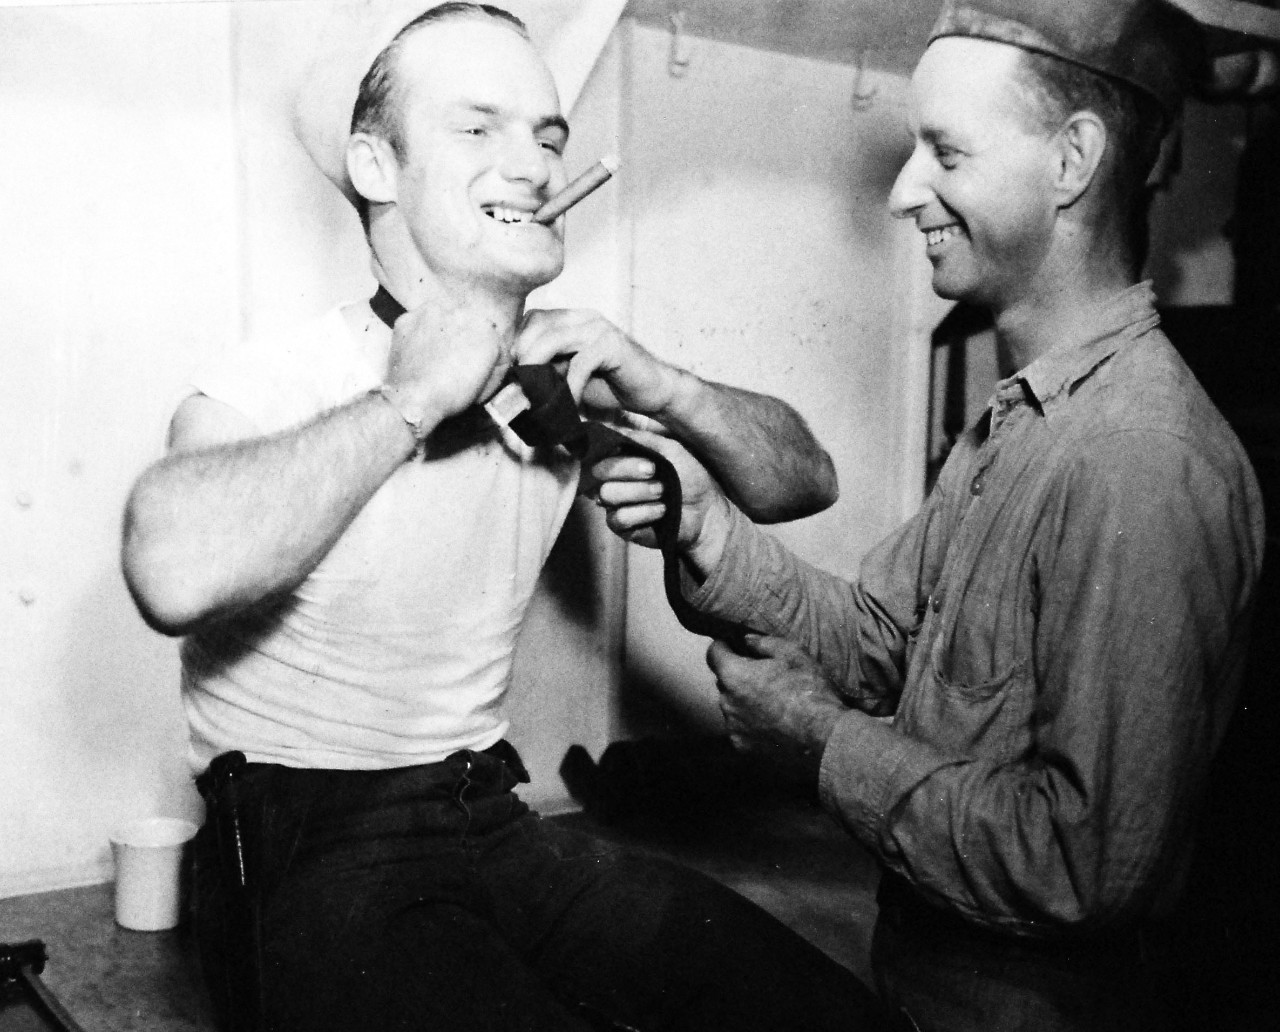 80-G-354681:  V-J Day, August 15,1945.    Aboard USS Ticonderoga (CV-14), PhoM3/C Duane L. Corkrum and PhoM3/C Marshall F. Hosp, practice tying a civilian tie after the announcement of V-J Day.   Photographed by PhoM3/c J.D. McGhie.    Photographed August 15, 1945.  Official U.S. Navy photograph, now in the collections of the National Archives.  (2016/06/21).